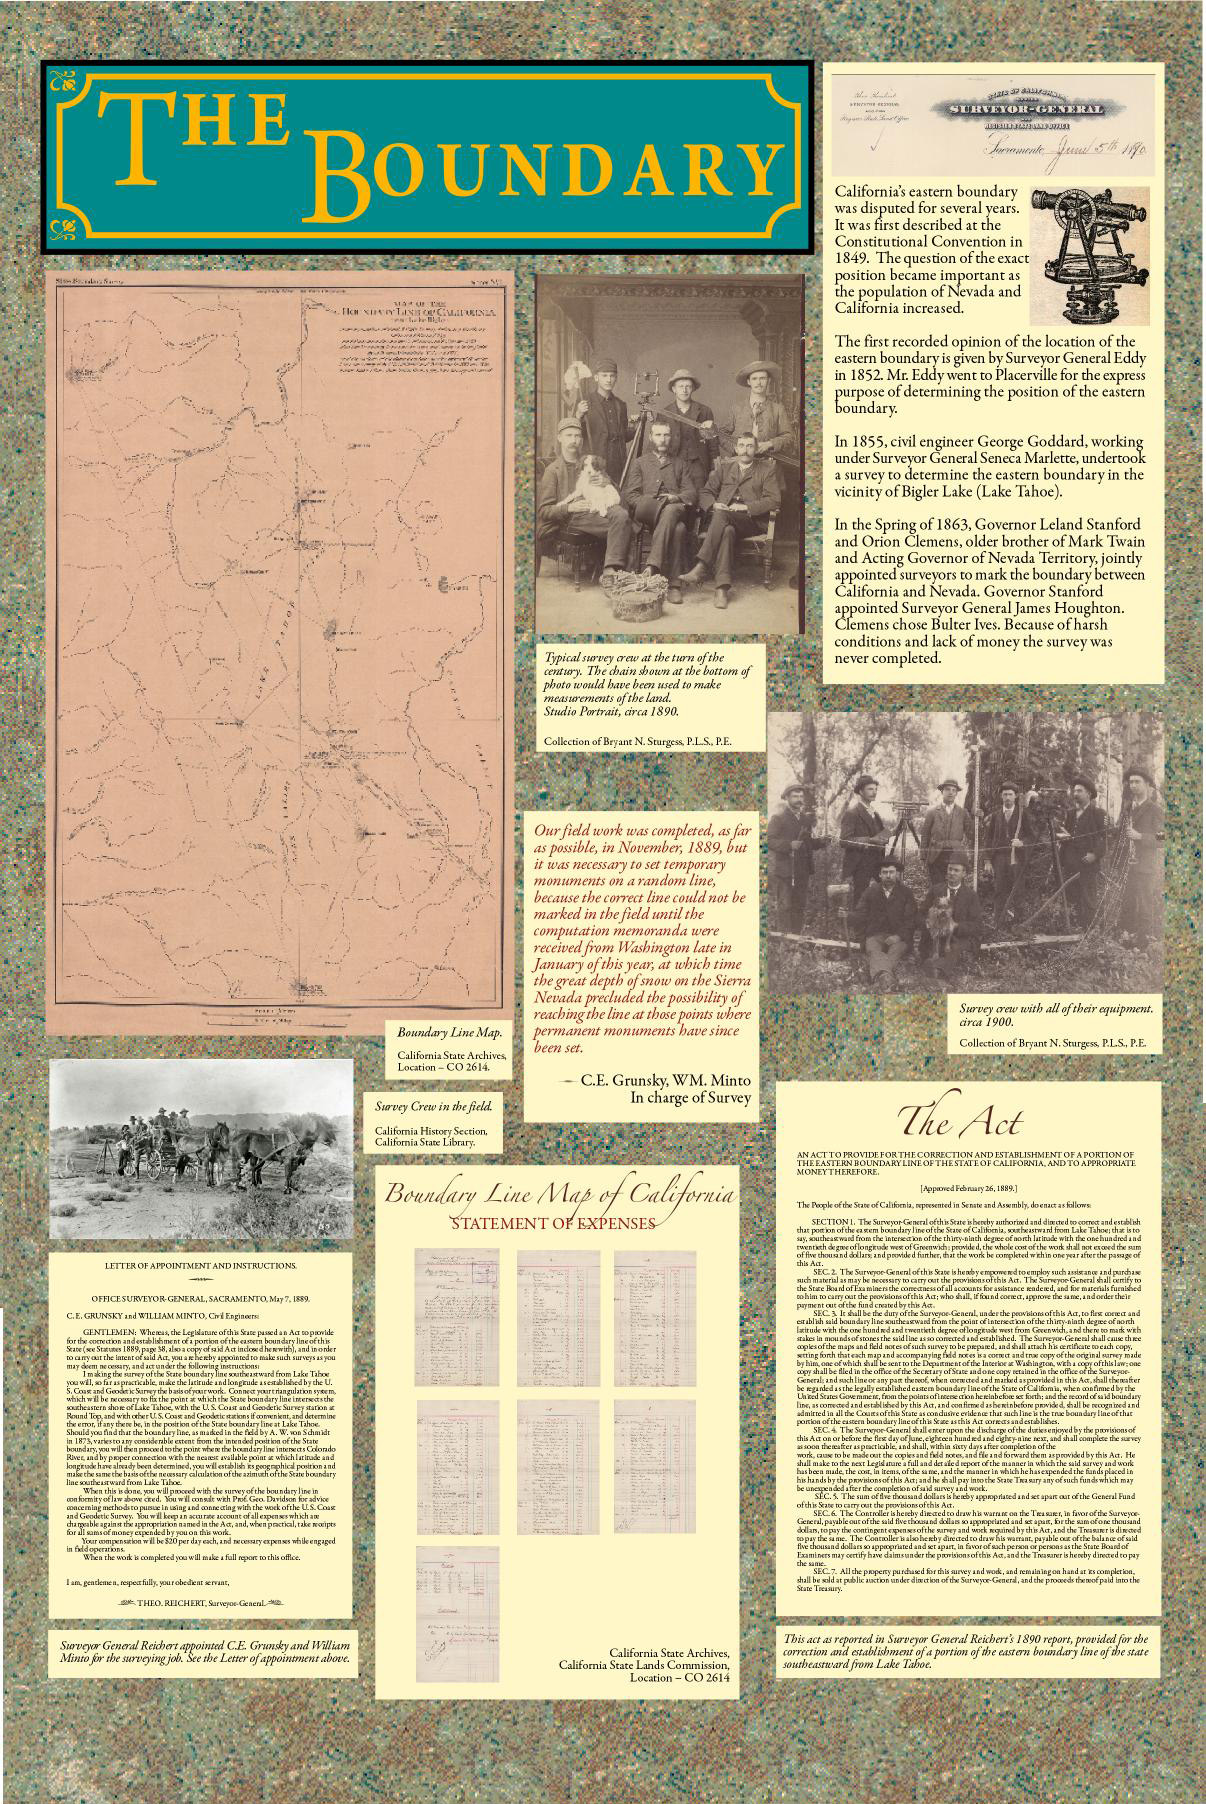 "The Boundary" panel from the informational exhibit presented at the capitol building